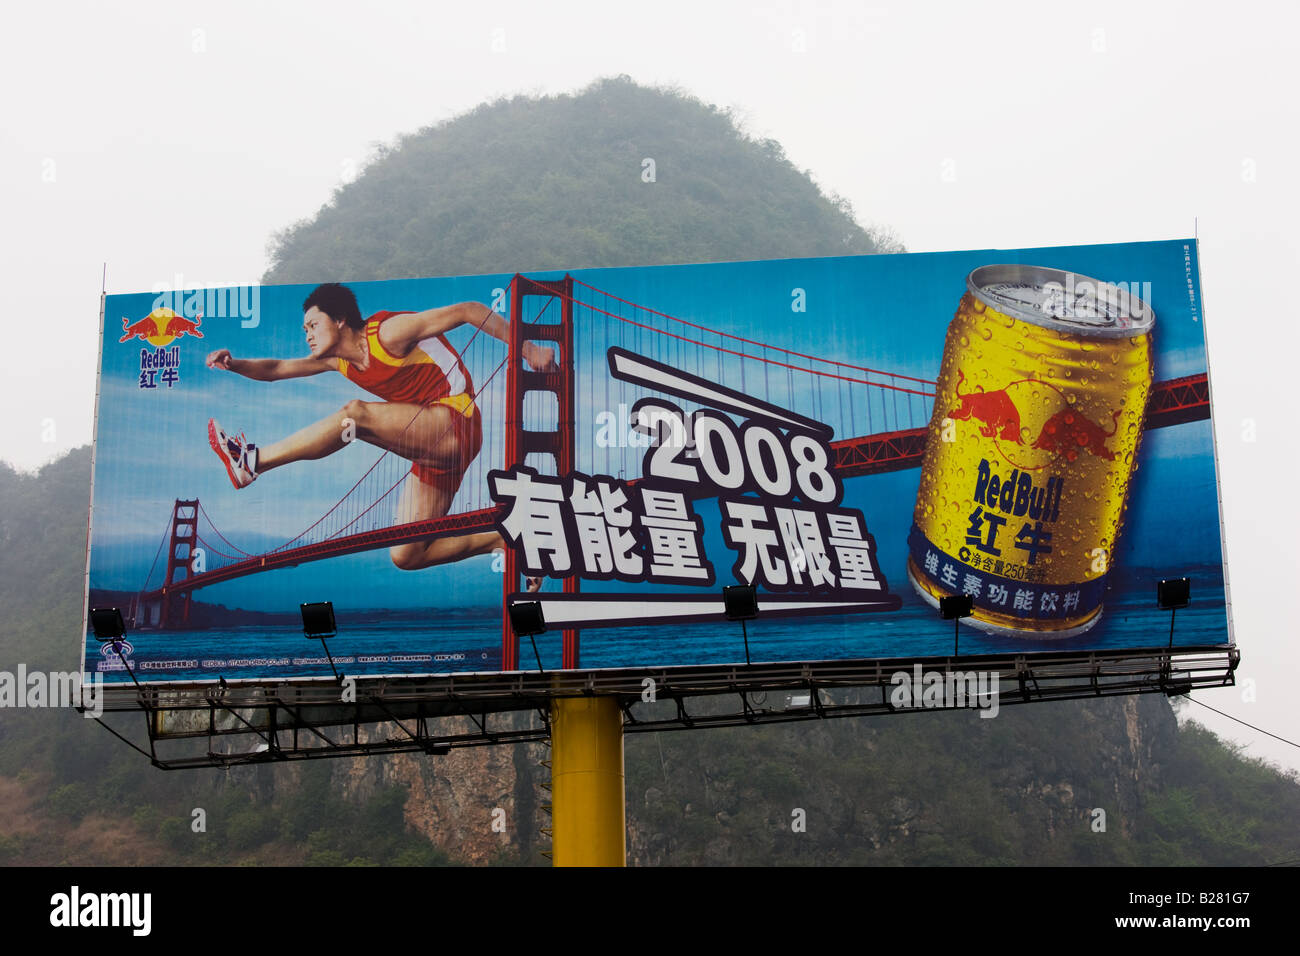 Red Bull billboard sponsor for 2008 Beijing Olympic Games near Guilin China Stock Photo